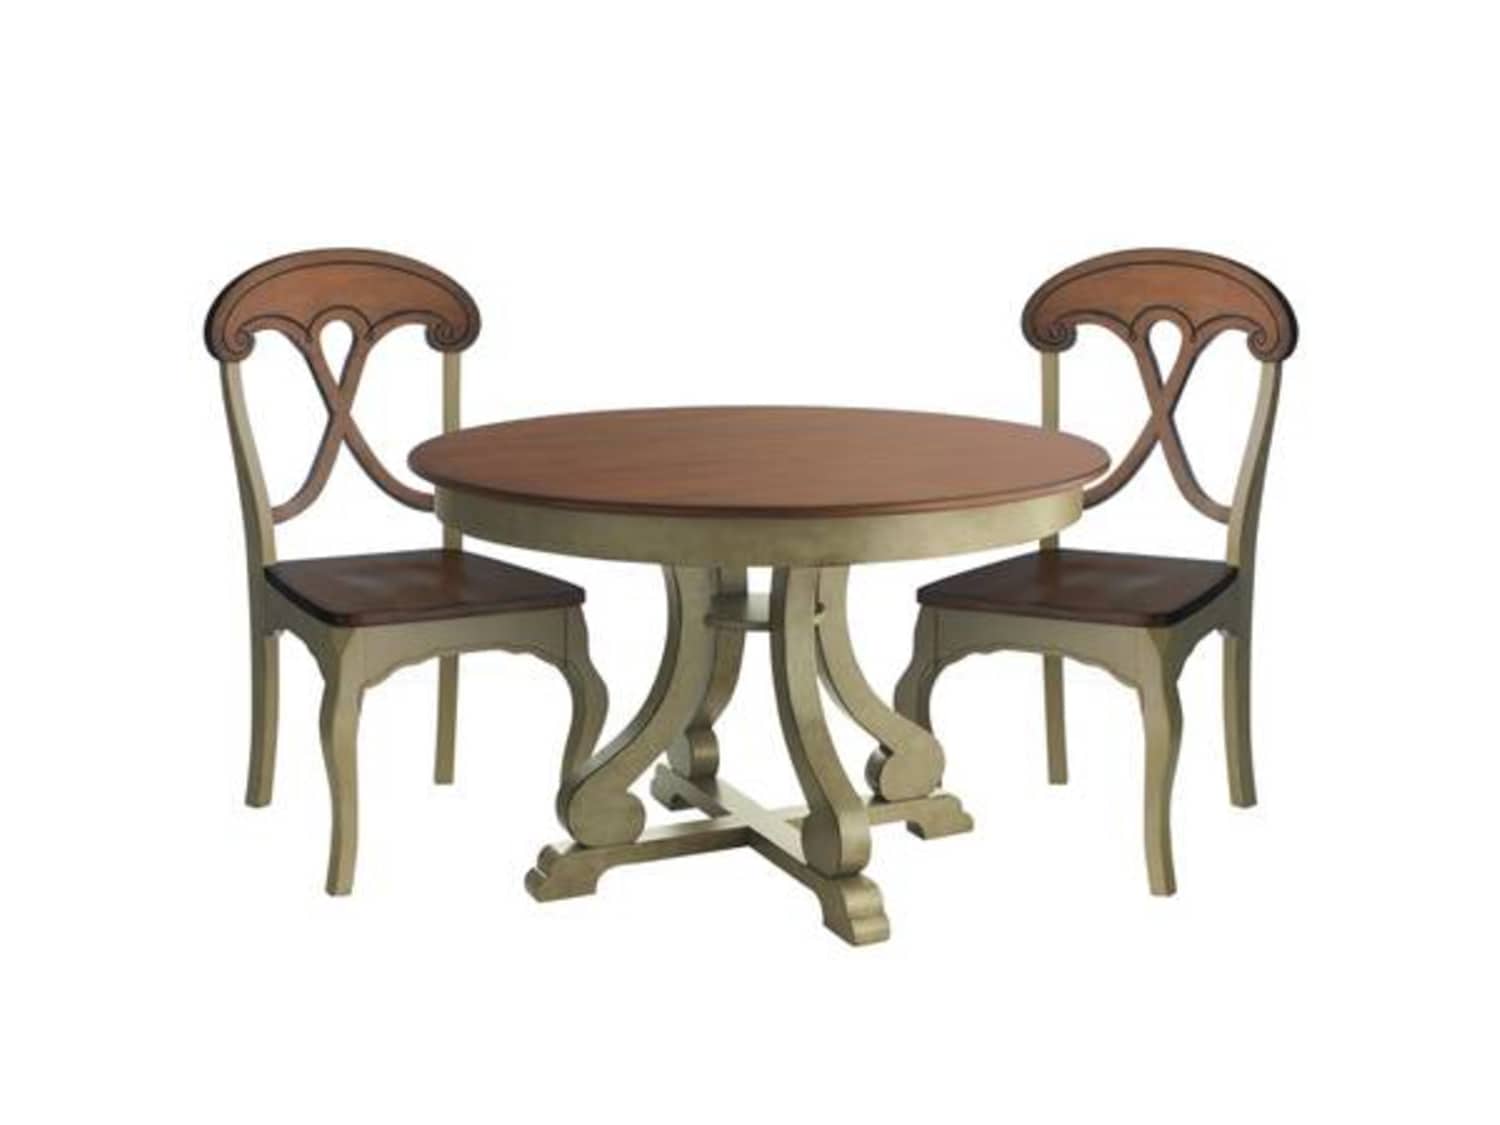 pier 1 marchella dining table  chairs  apartment therapy's